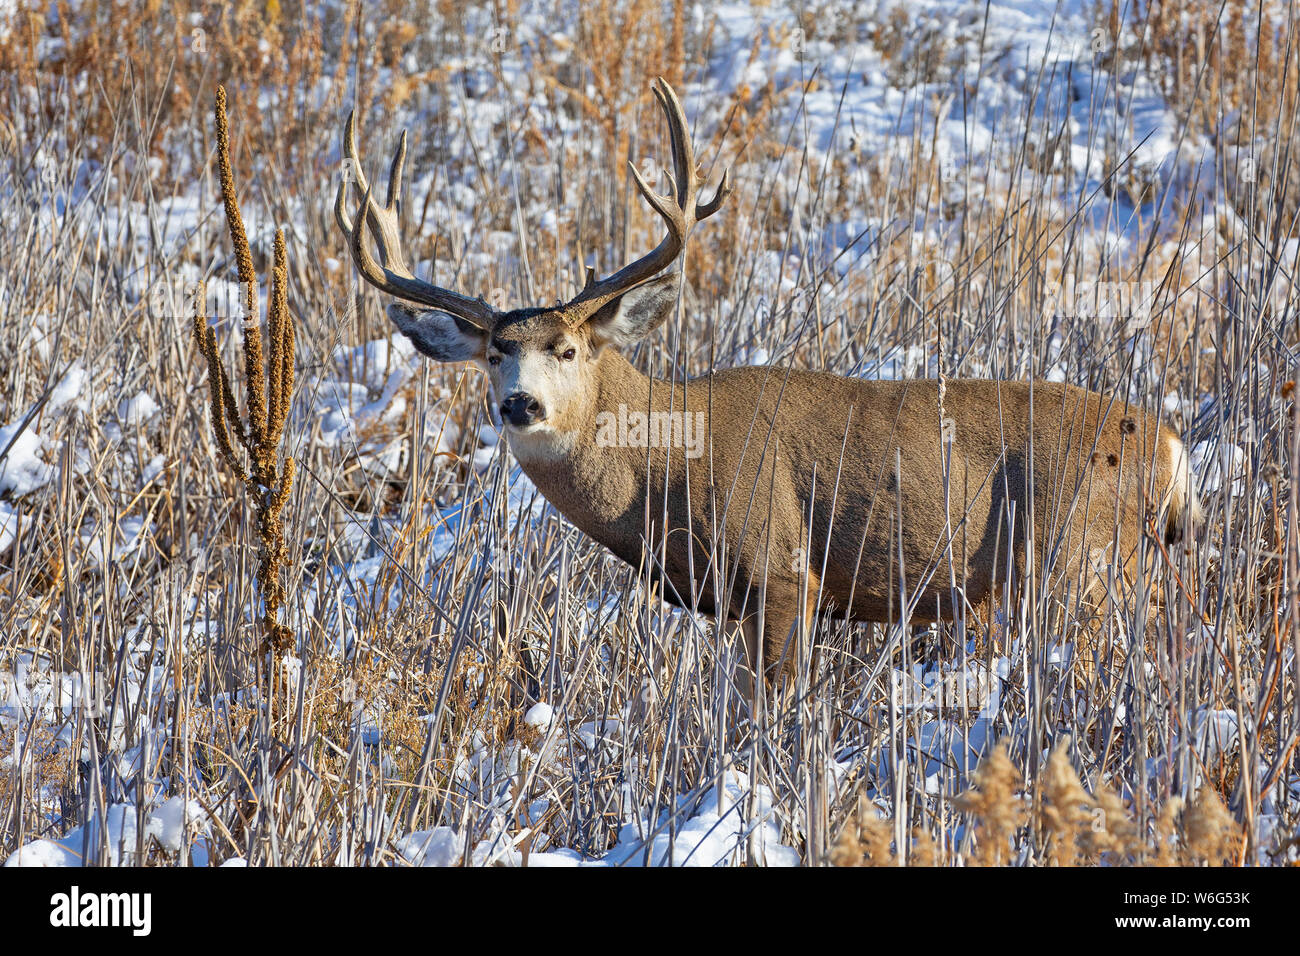 Mule deer buck (Odocoileus hemionus) standing in a grass field with traces of snow; Denver, Colorado, United States of America Stock Photo